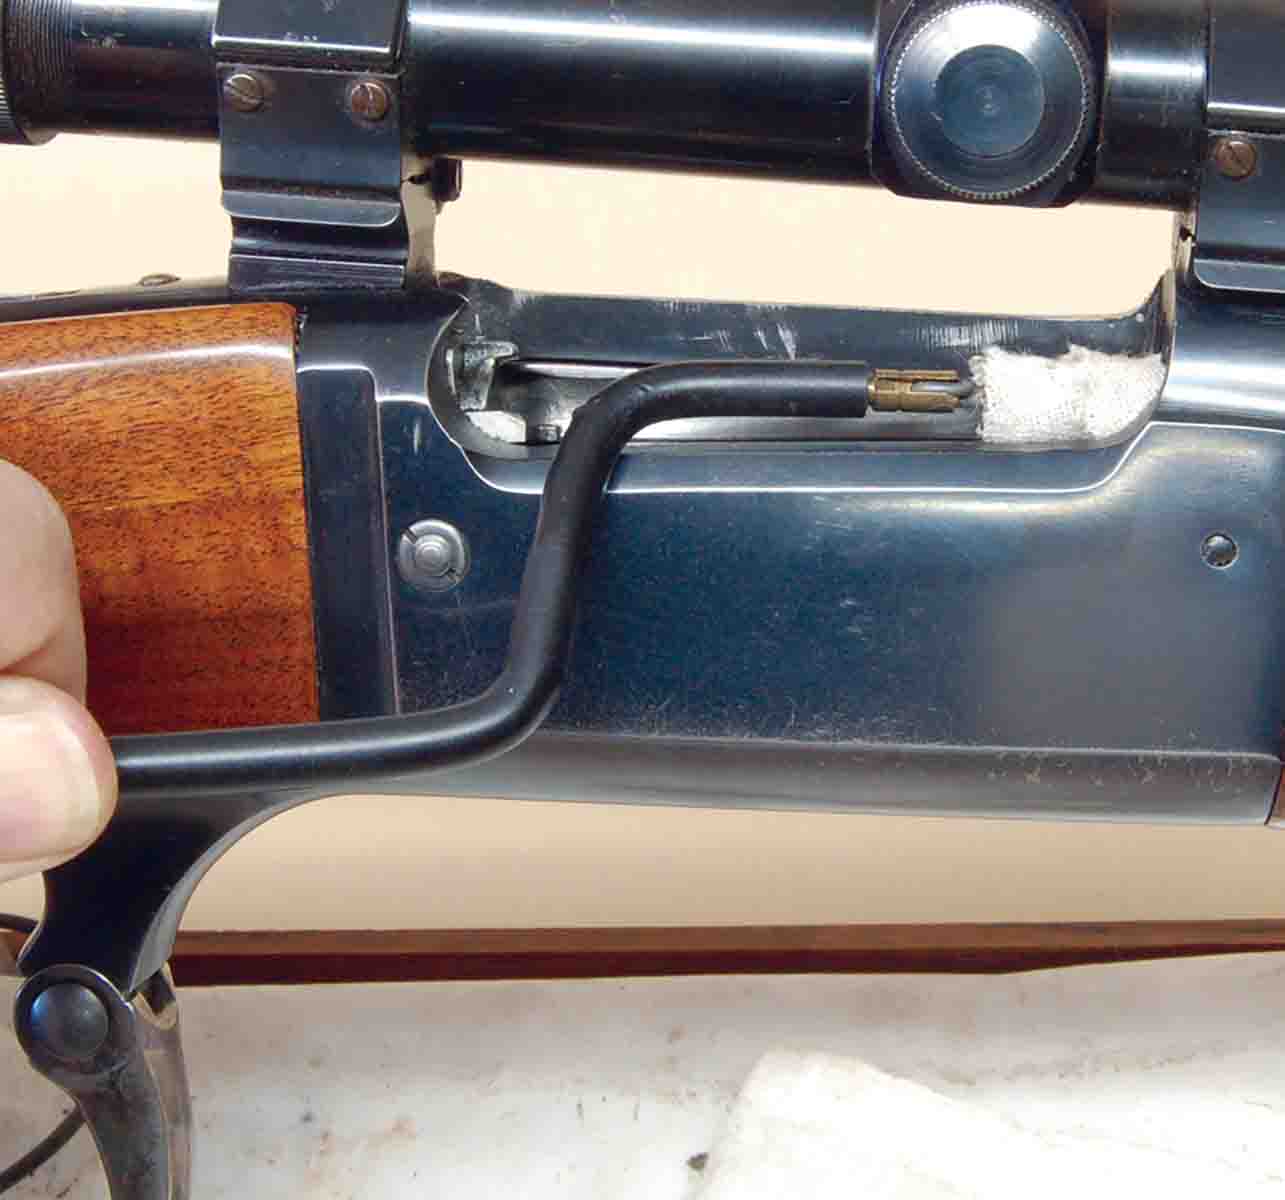 Chamber cleaning and lubing of solid-frame guns is easily done using a bent acetal rod fitted with a bronze brush and patch.